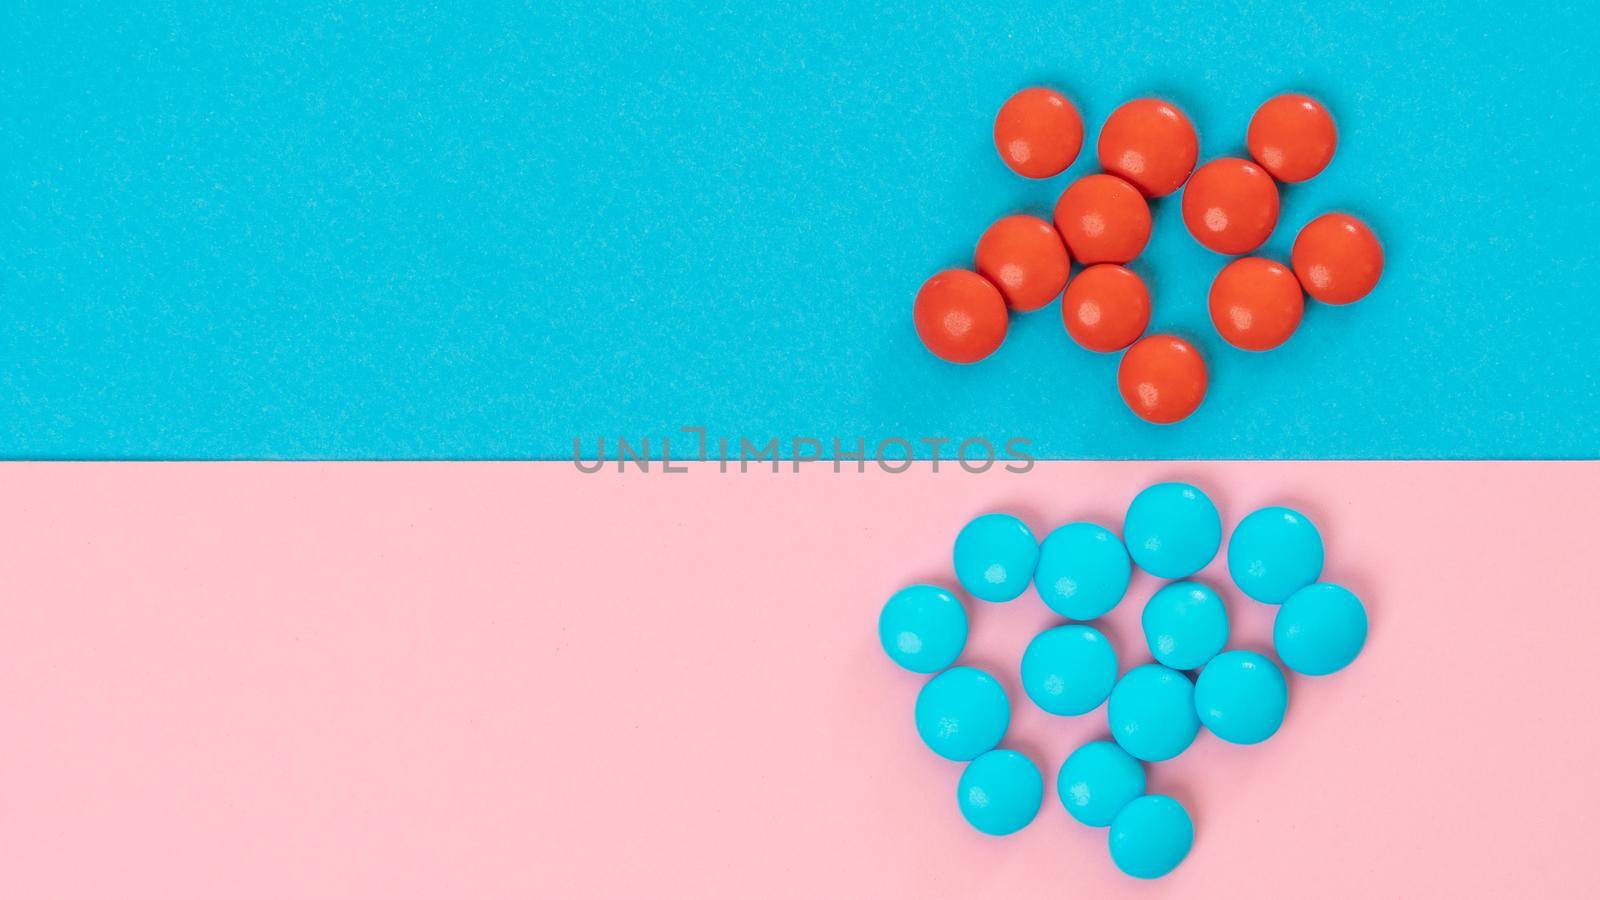 Blue and red candies on a two-tone background - bright collage by voktybre